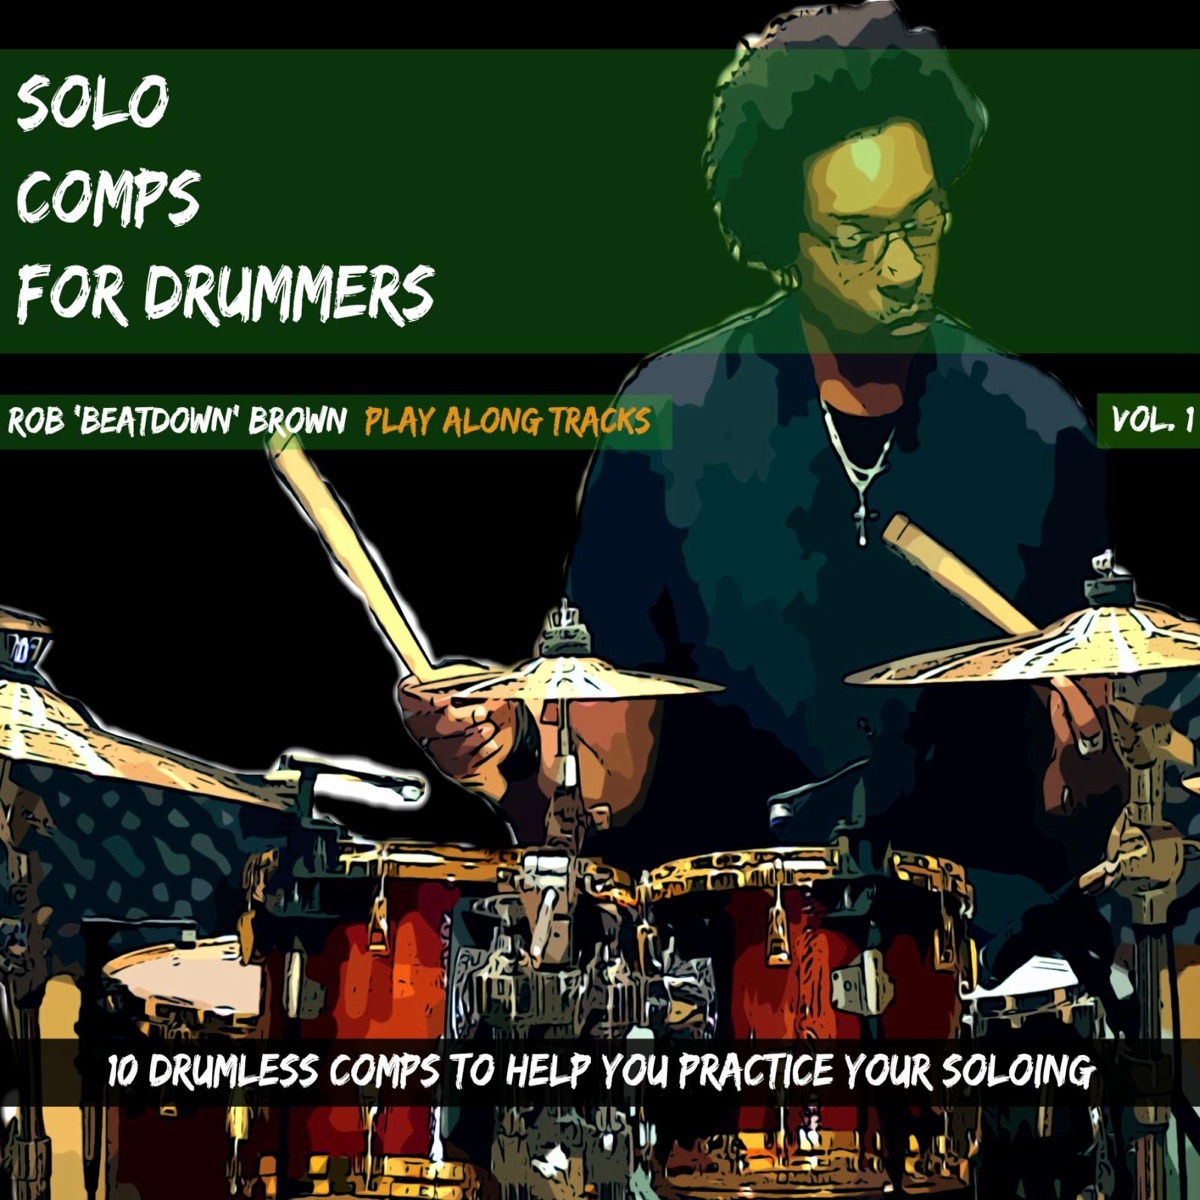 Solo Comps for Drummers, Vol. 1 - Album by Rob Brown - Apple Music